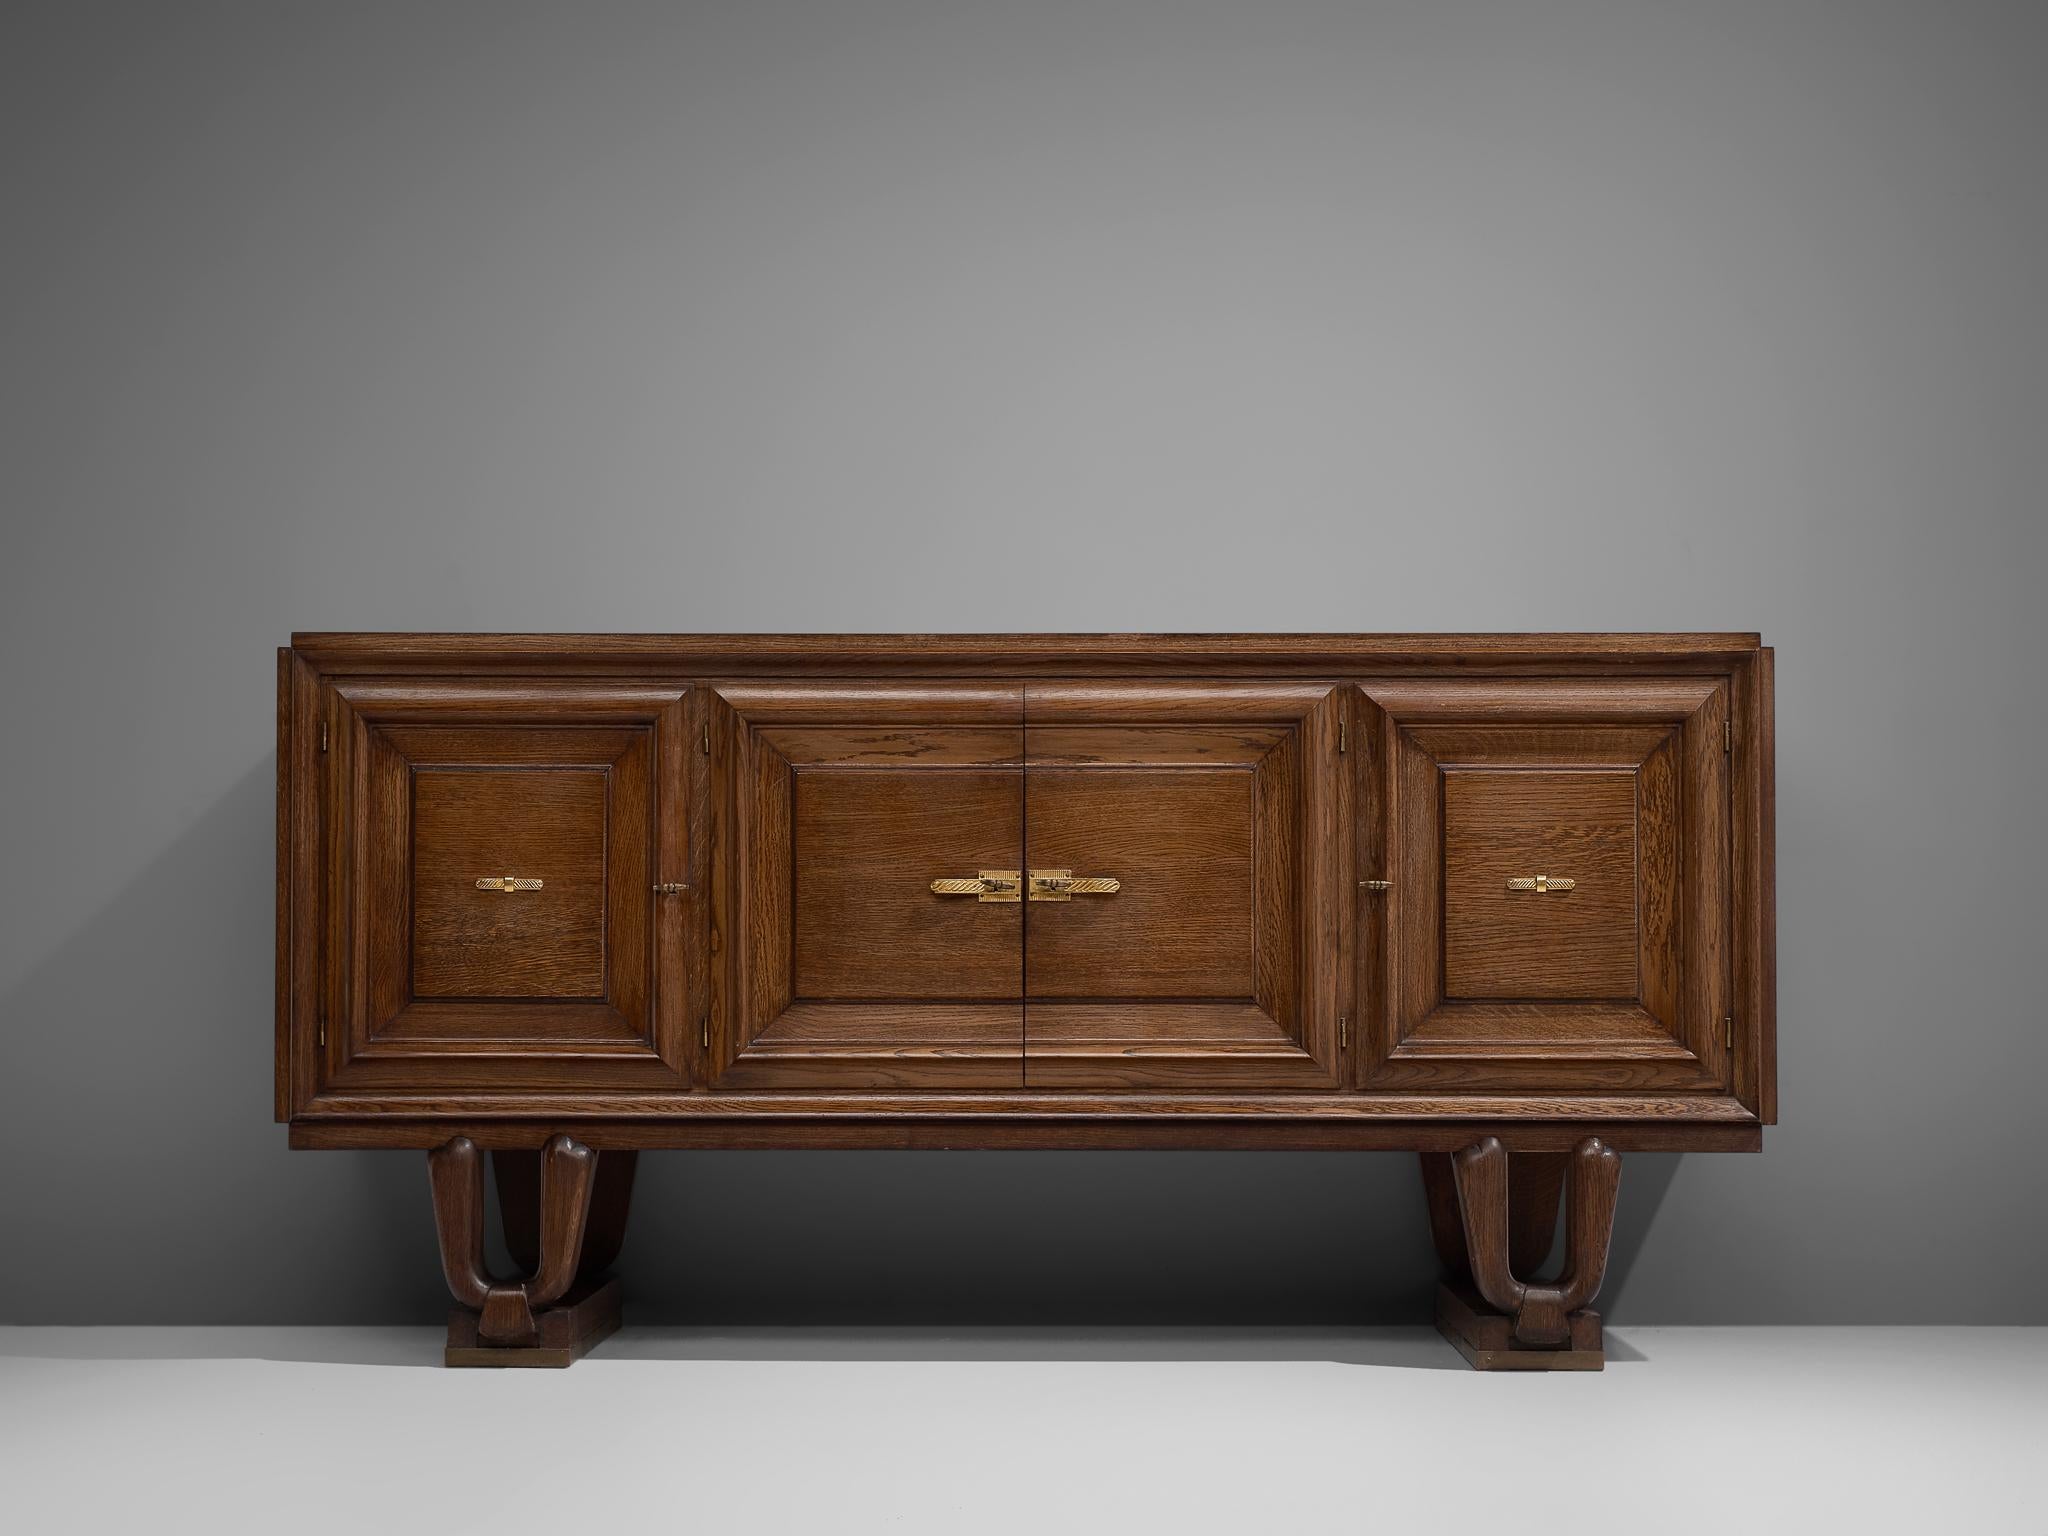 Credenza, in oak and metal, France, 1930s.

French Art Deco cabinet in cerused oak with high, sculpted legs. Designers Charles Dudouyt, Jean-Charles Moreux and Gaston Poisson are masters in this style. The front features three dimensional carvings